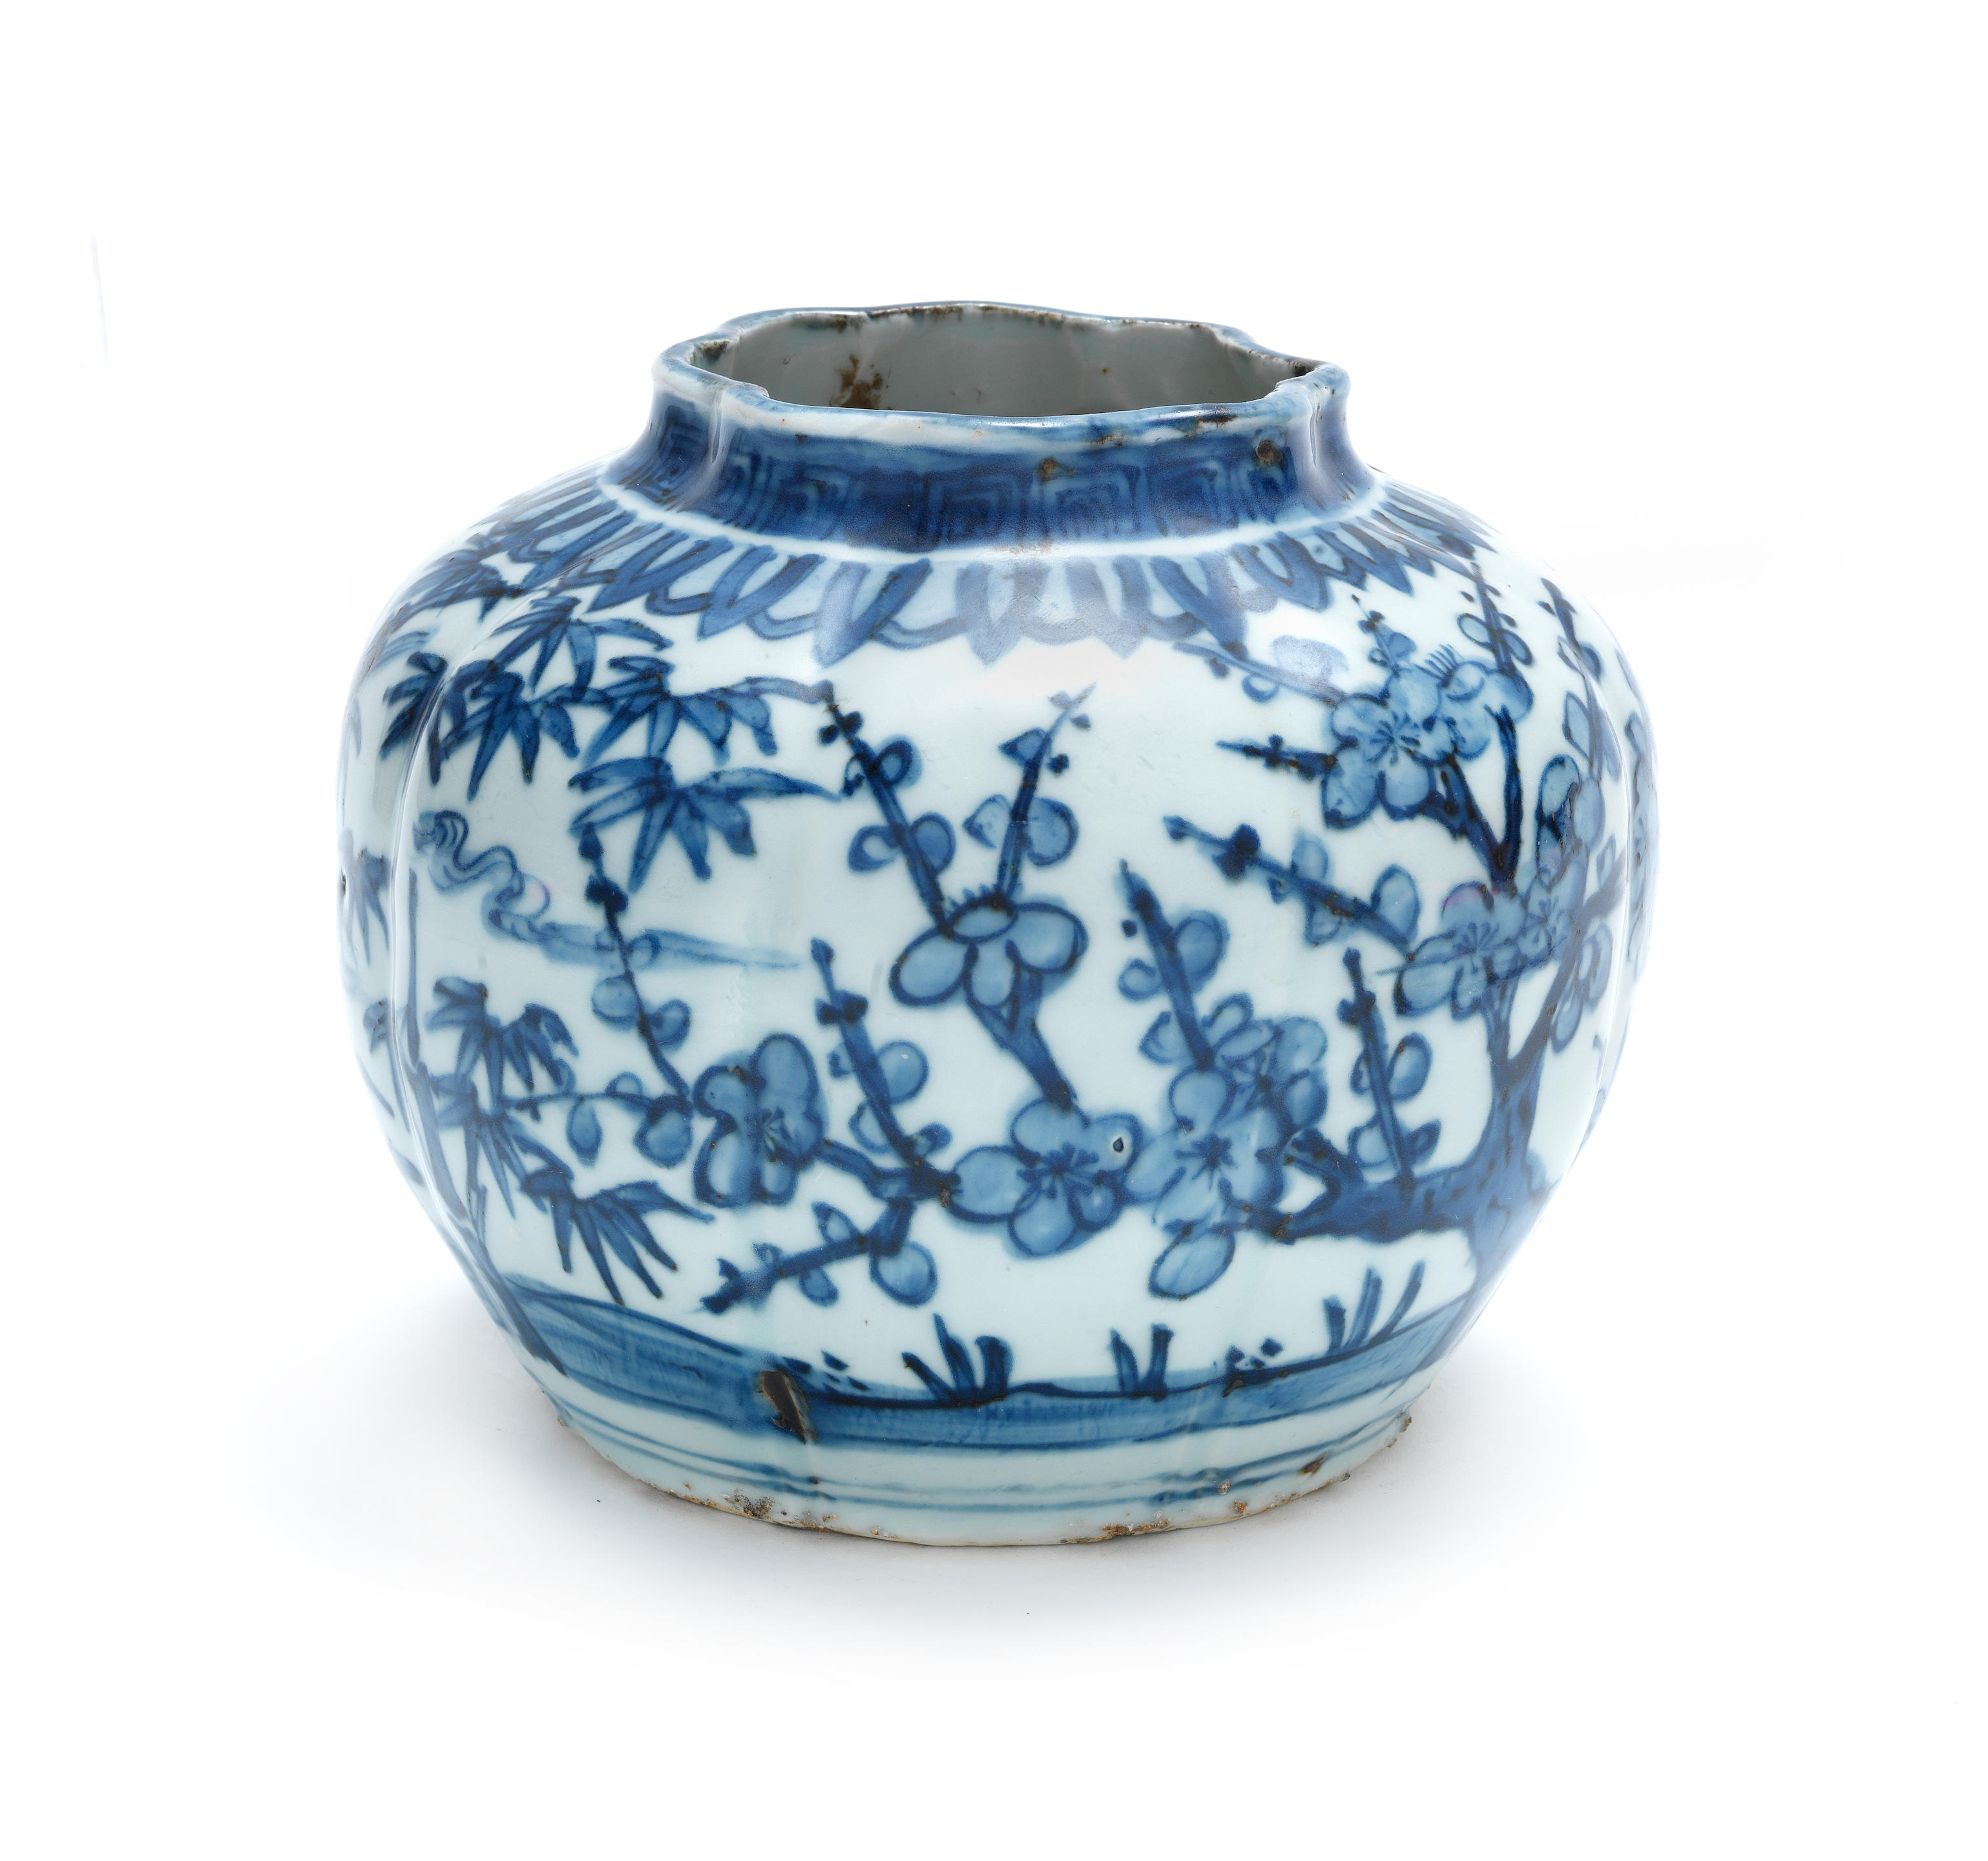 A small blue and white 'three friends of winter' lobed jar